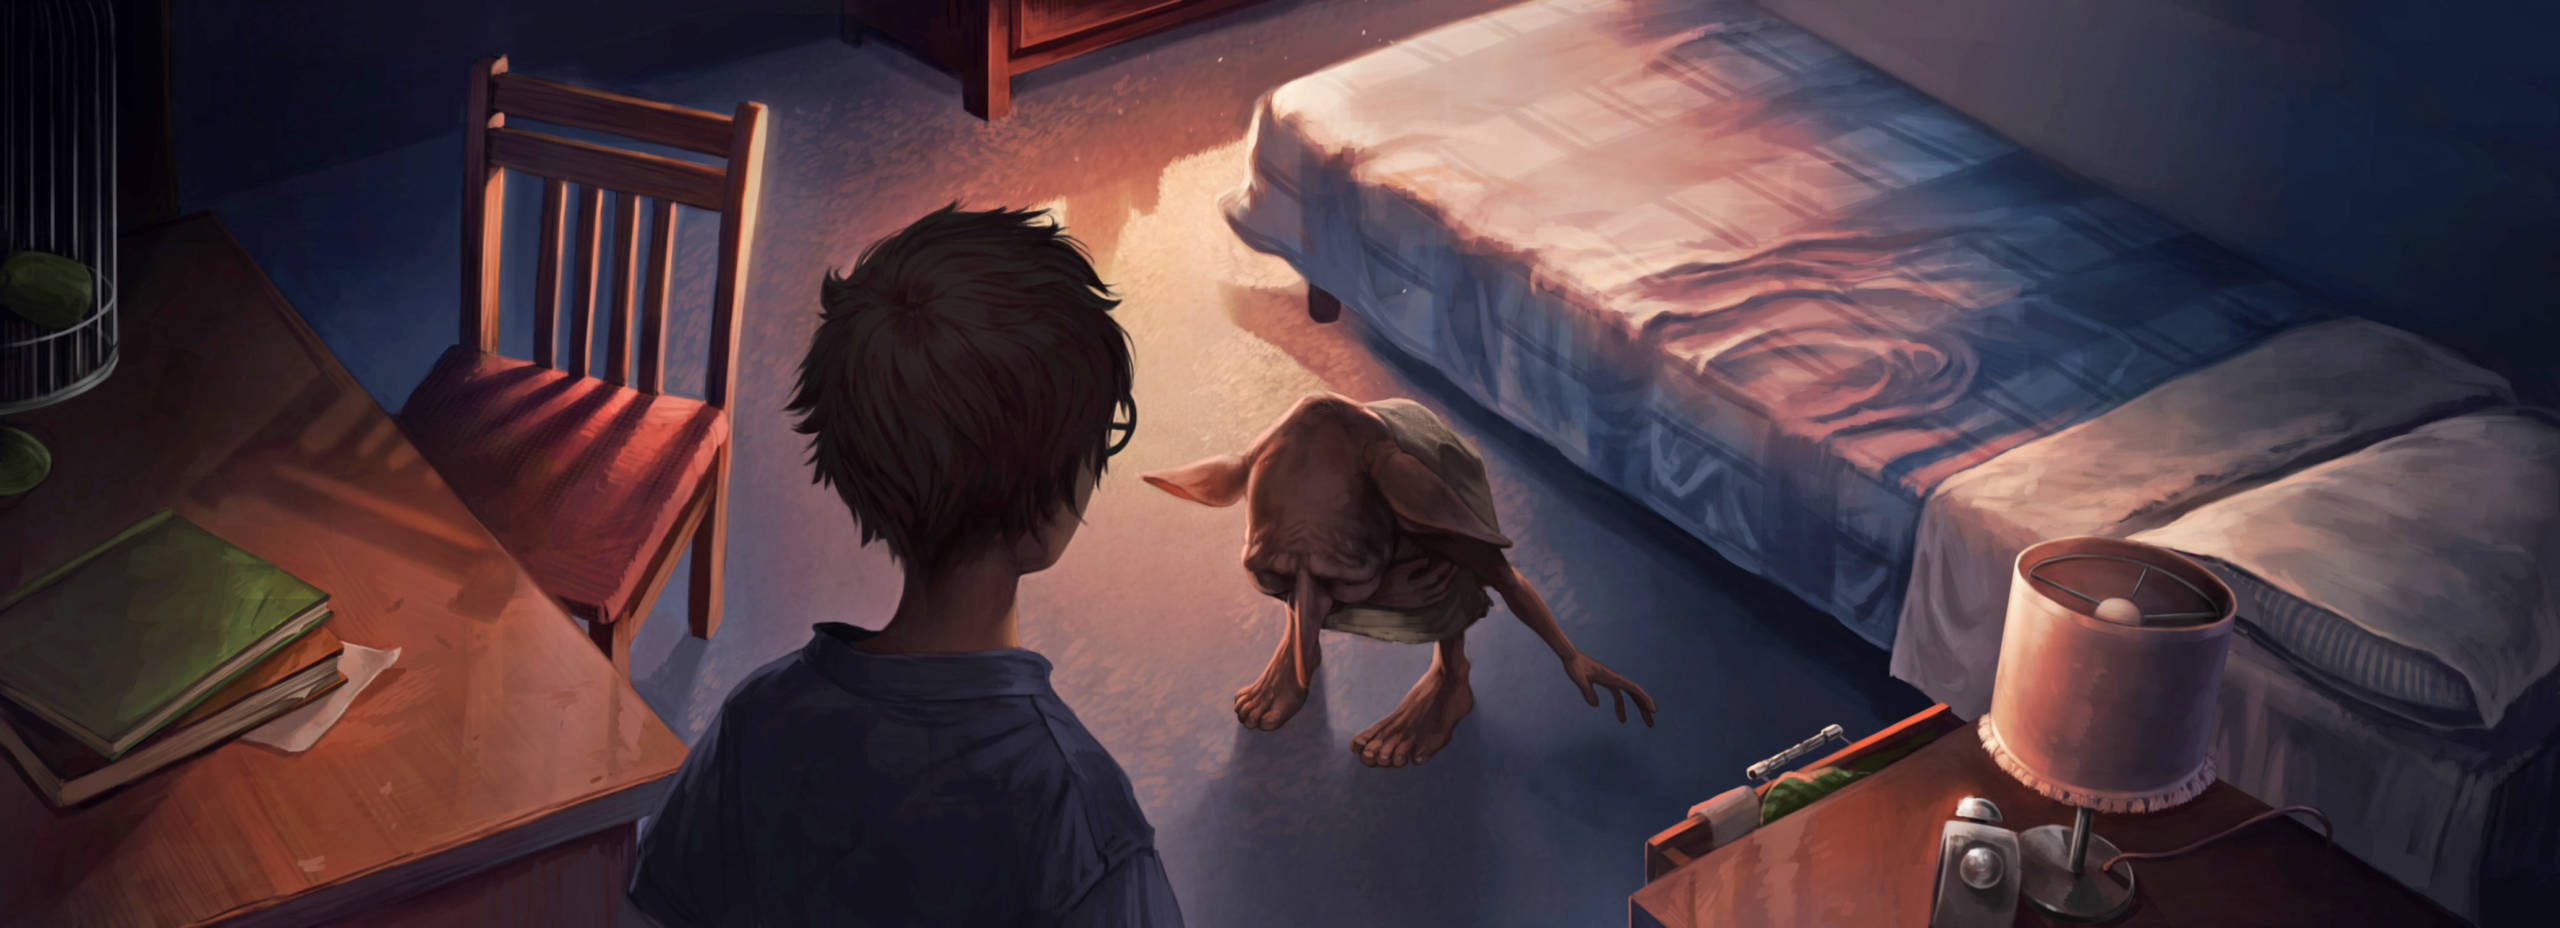 Dobby bows to Harry in his bedroom in Privet Drive